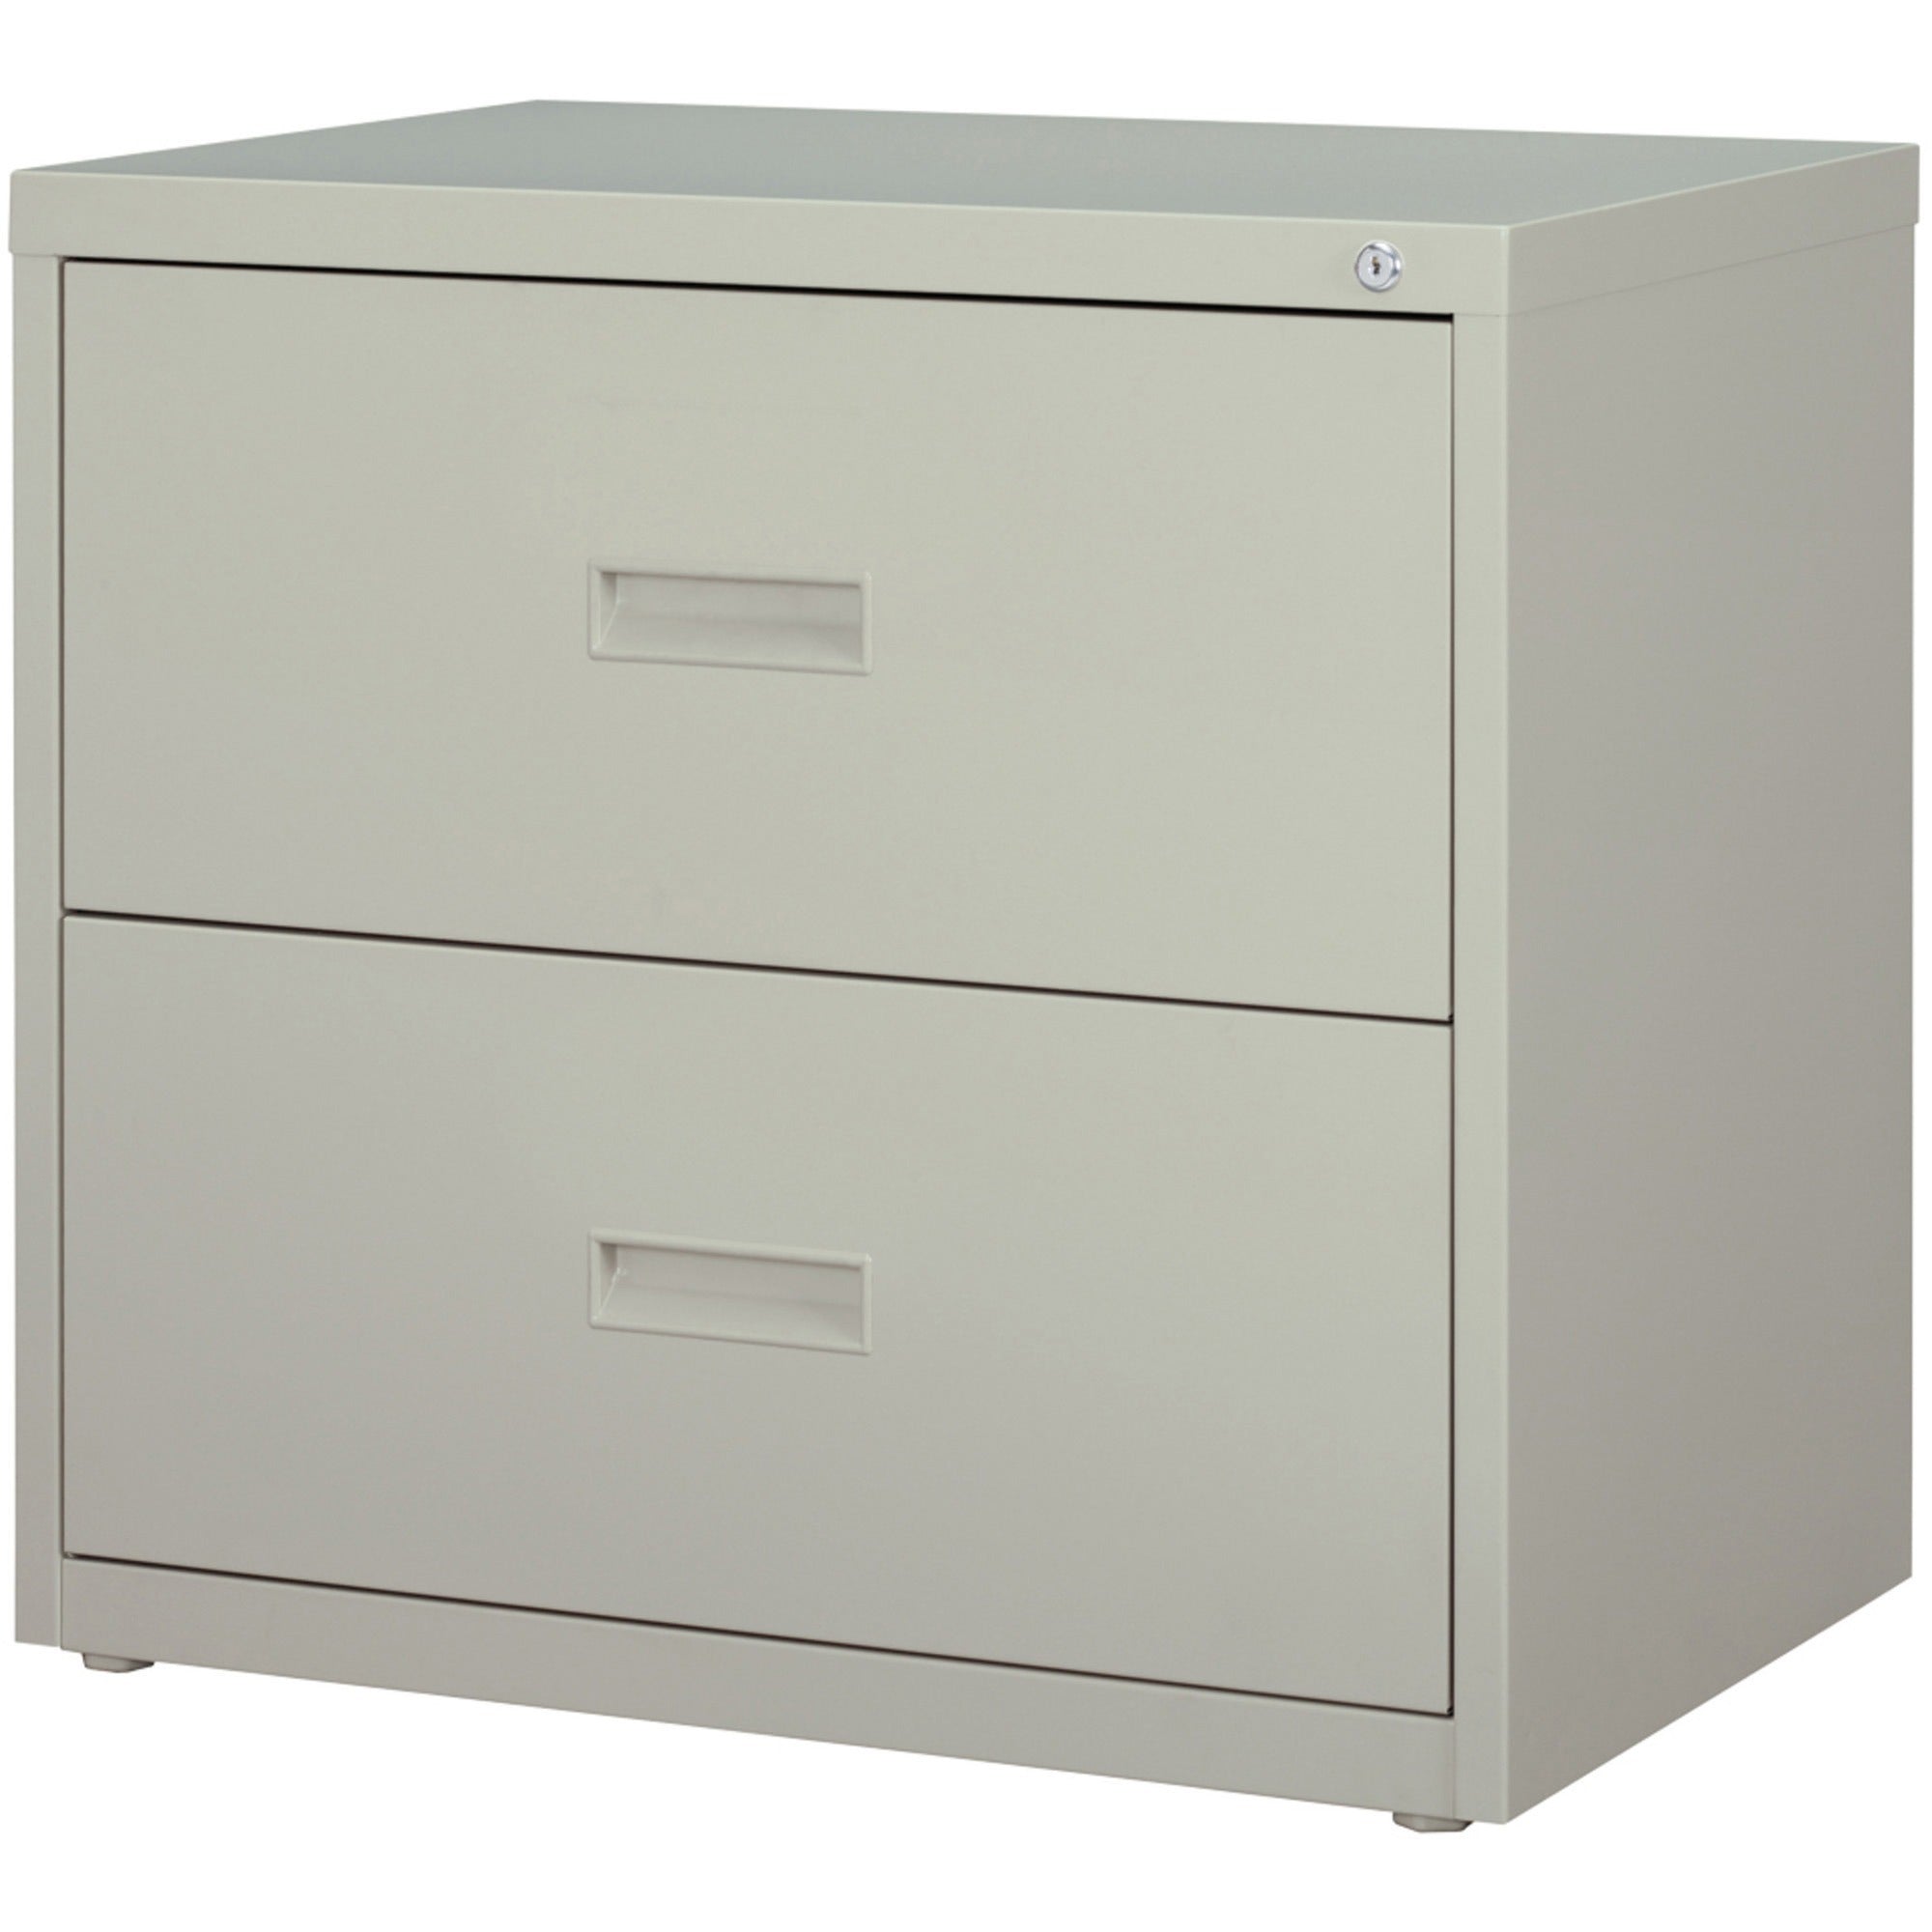 Lorell Value Lateral File - 2-Drawer - 30" x 18.6" x 28.1" - 2 x Drawer(s) for File - A4, Letter, Legal - Interlocking, Ball-bearing Suspension, Adjustable Glide - Light Gray - Steel - Recycled - 